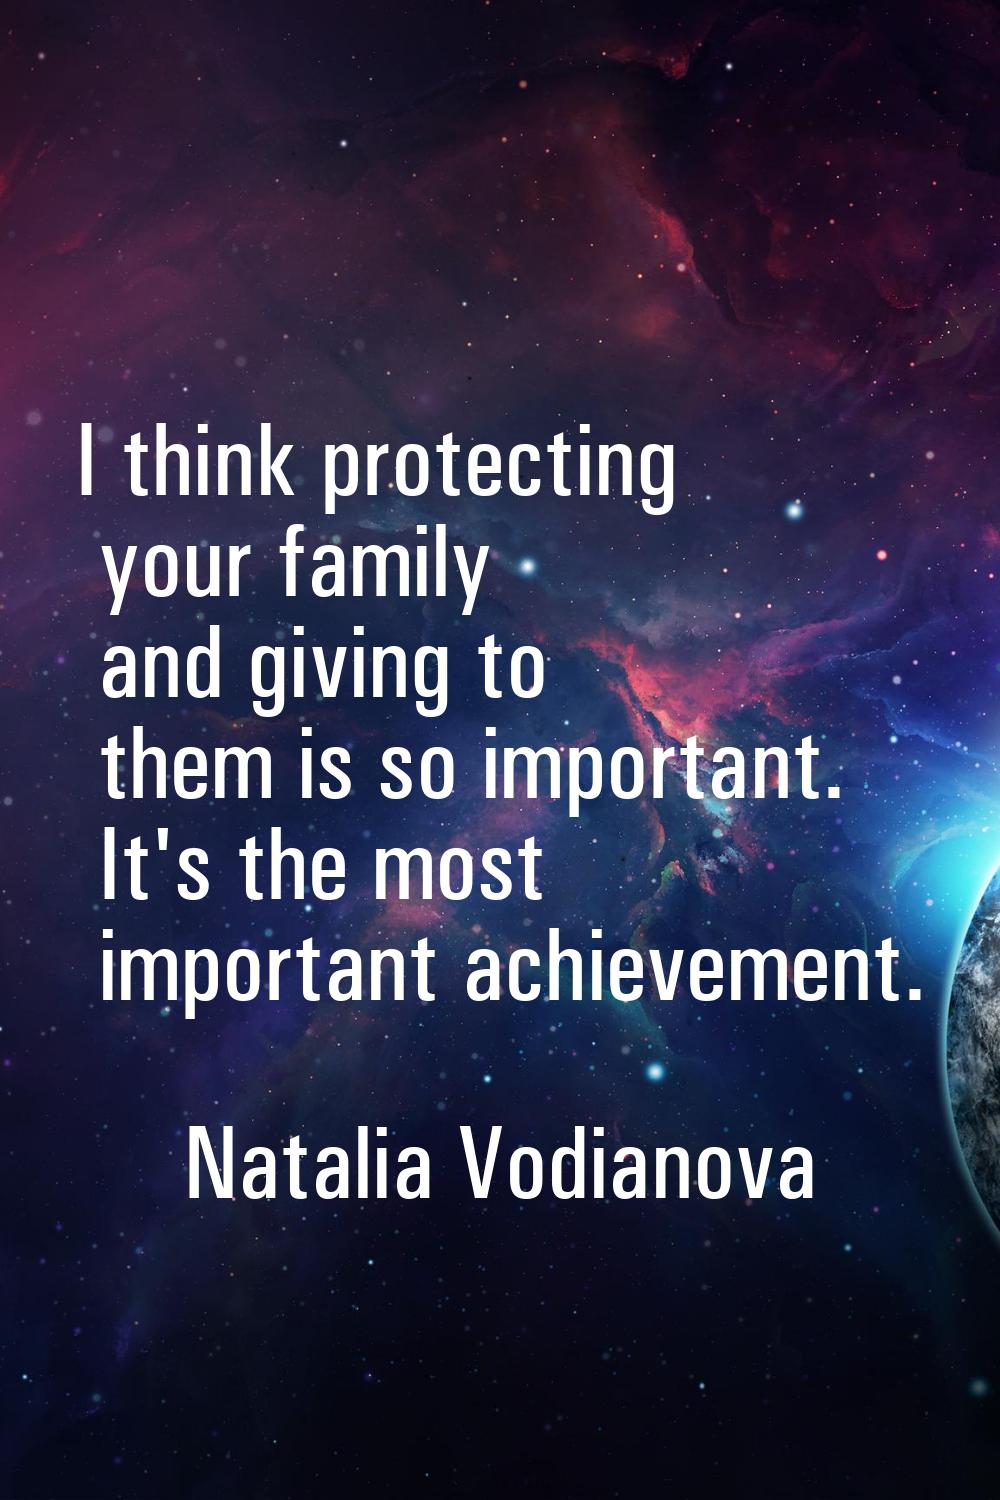 I think protecting your family and giving to them is so important. It's the most important achievem